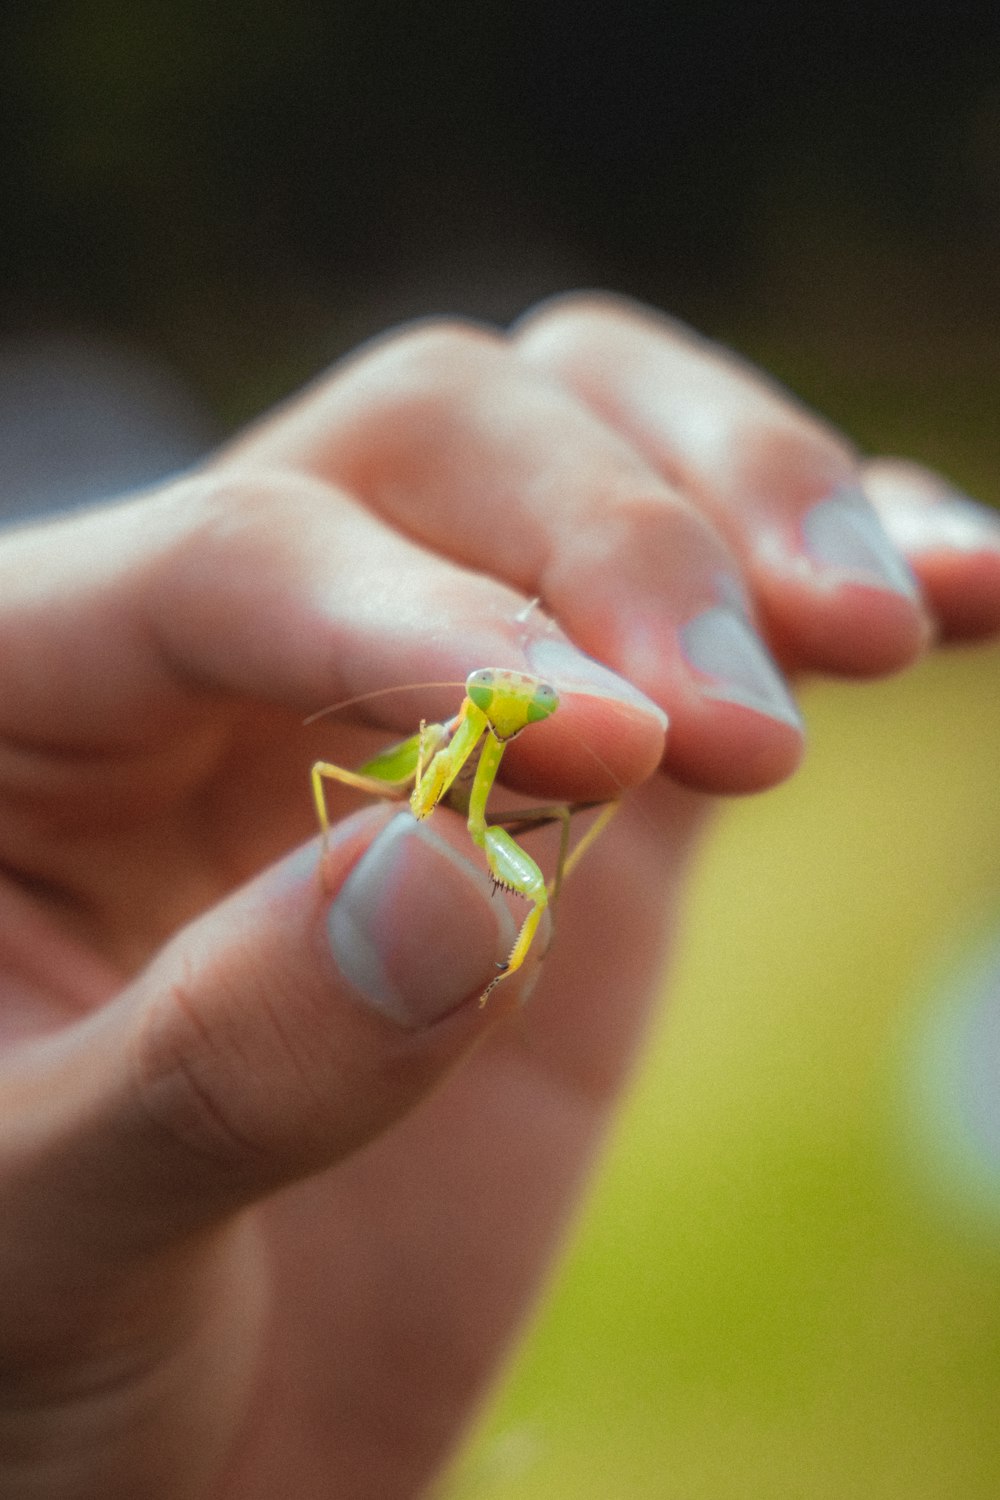 a person holding a small insect